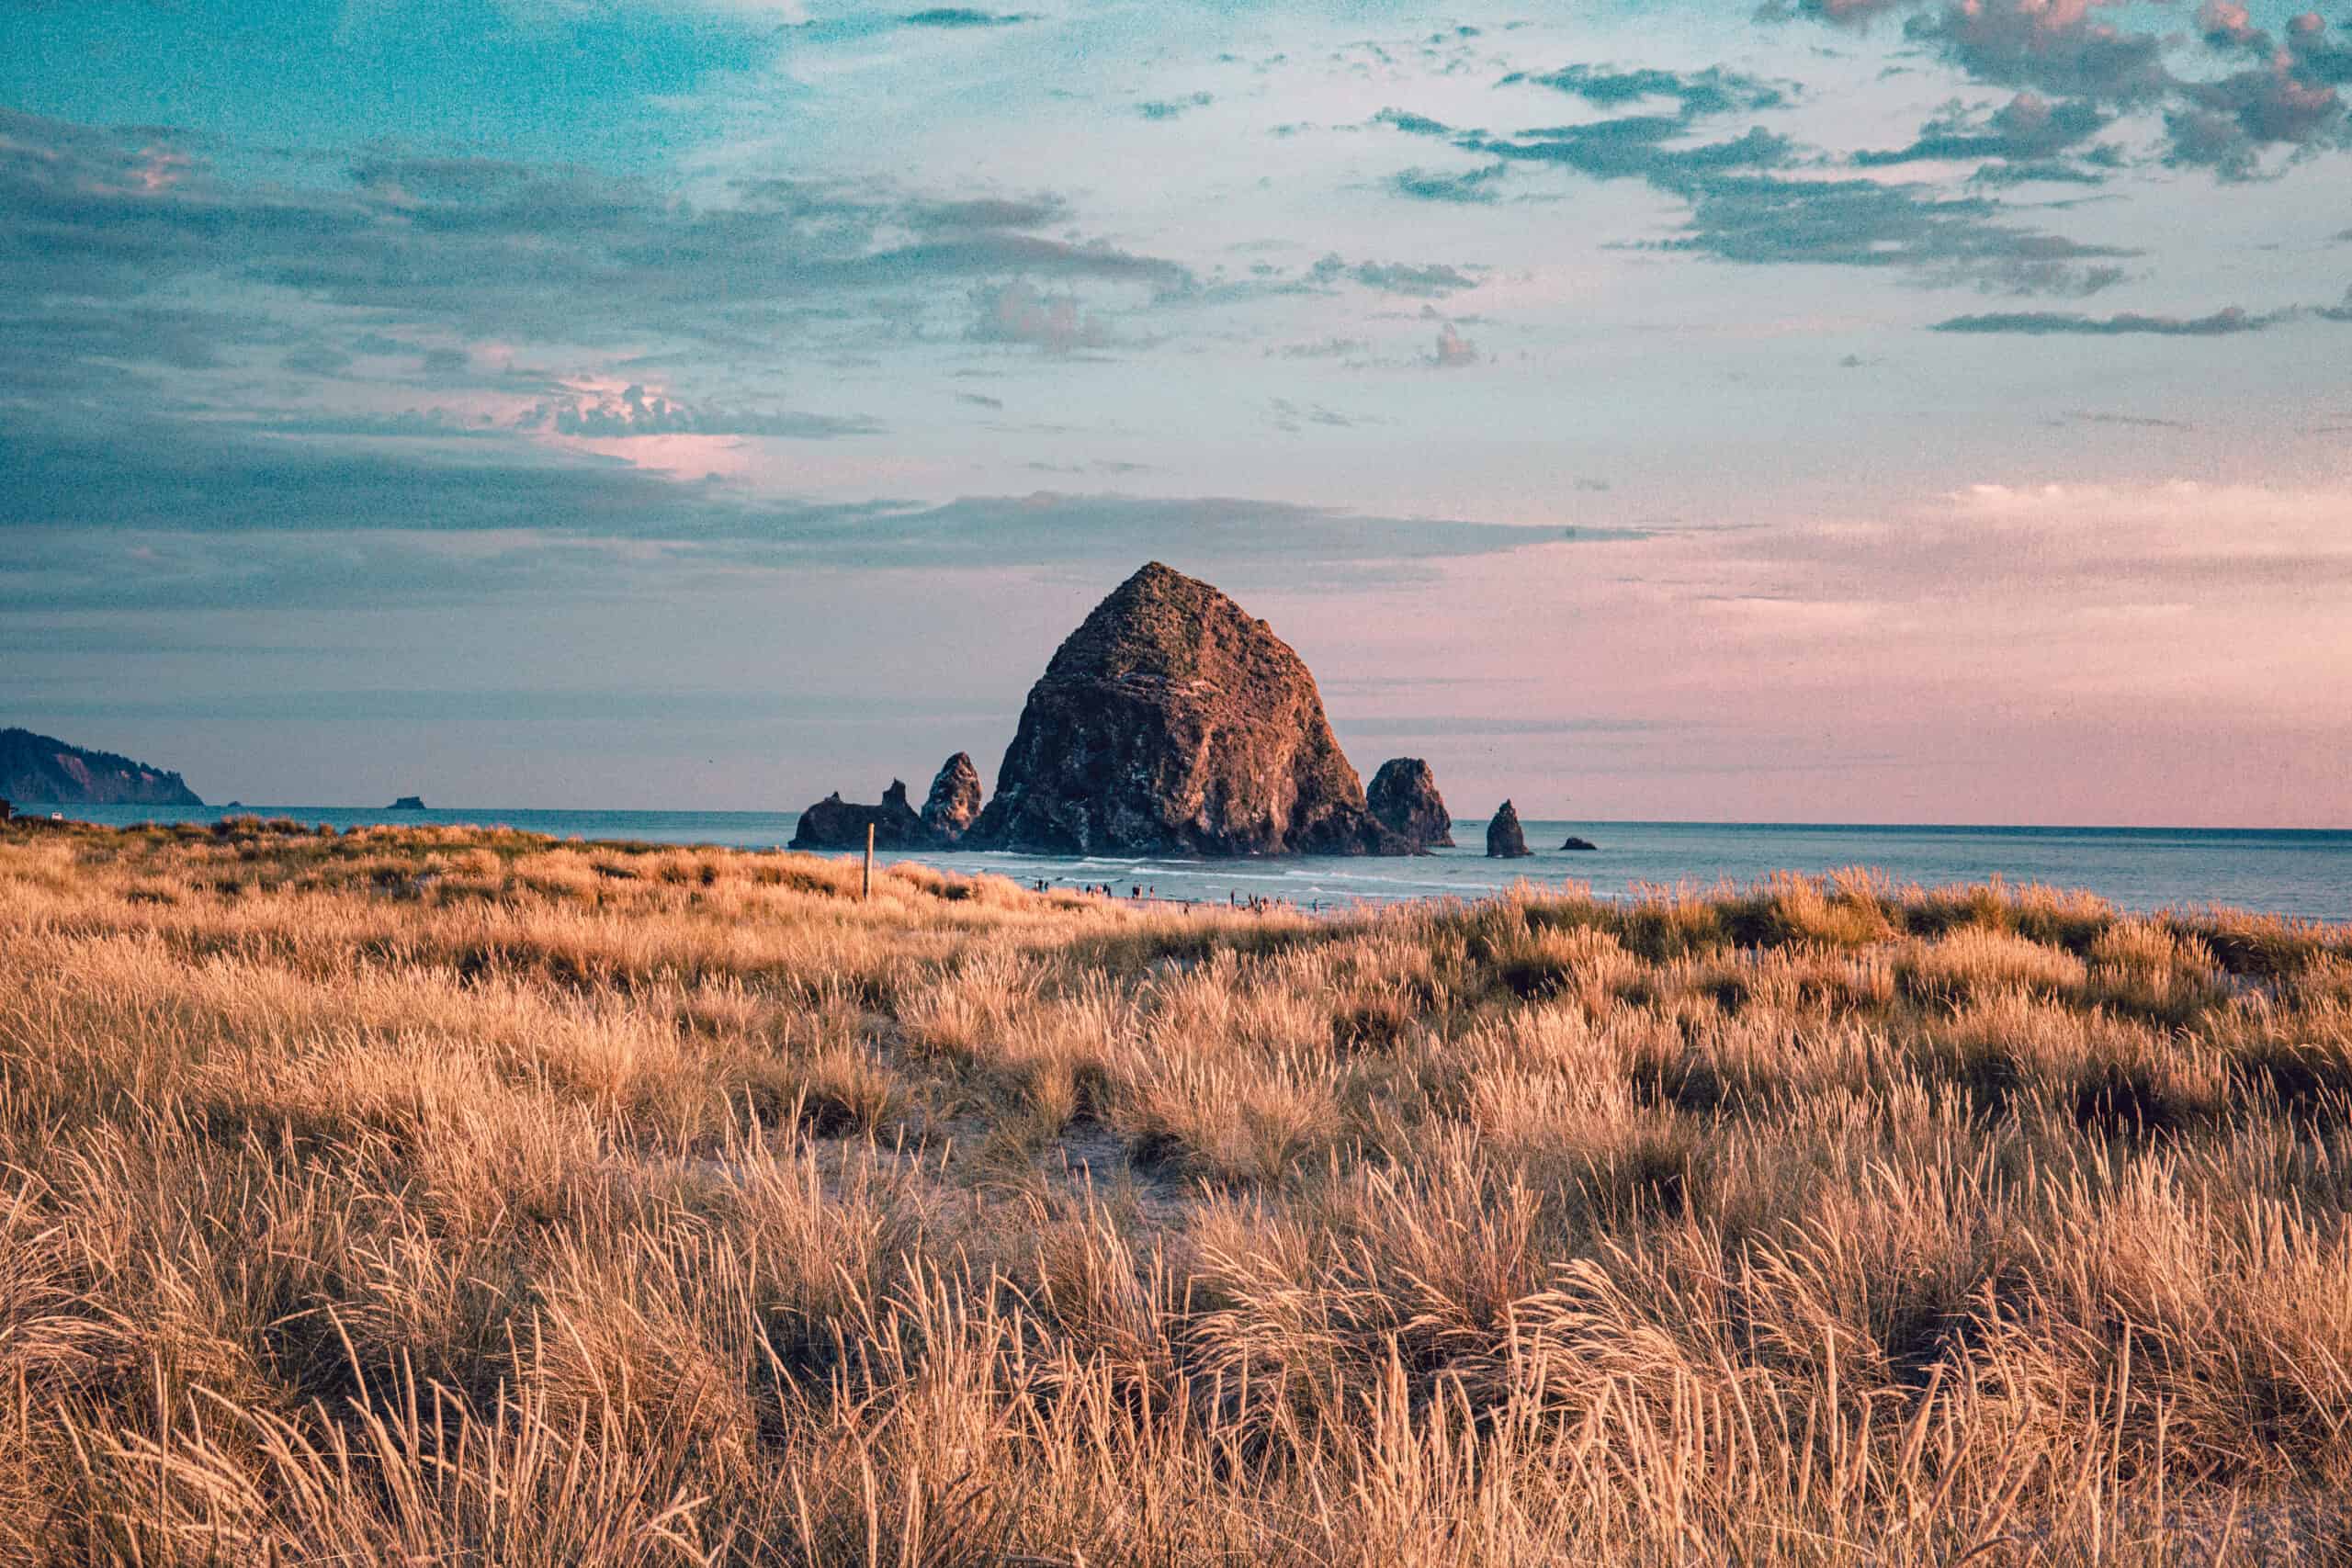 <p>You might recognize one of the most well-known landmarks on the Oregon coast, Haystack Rock near Cannon Beach, from the movie<em> The Goonies.</em> The basalt rock formation stands 235 feet tall and is part of the Oregon Islands National Wildlife Refuge. Visitors can explore the tidepools, and at low tide, you can walk out to Haystack Rock. The whole area is beautiful and teeming with wildlife like birds, sea lions, and crabs. During the Spring and Summer, you can see the tufted puffin birds, too. This is a great place where you can spend time outdoors on the historic Oregon coast.</p>